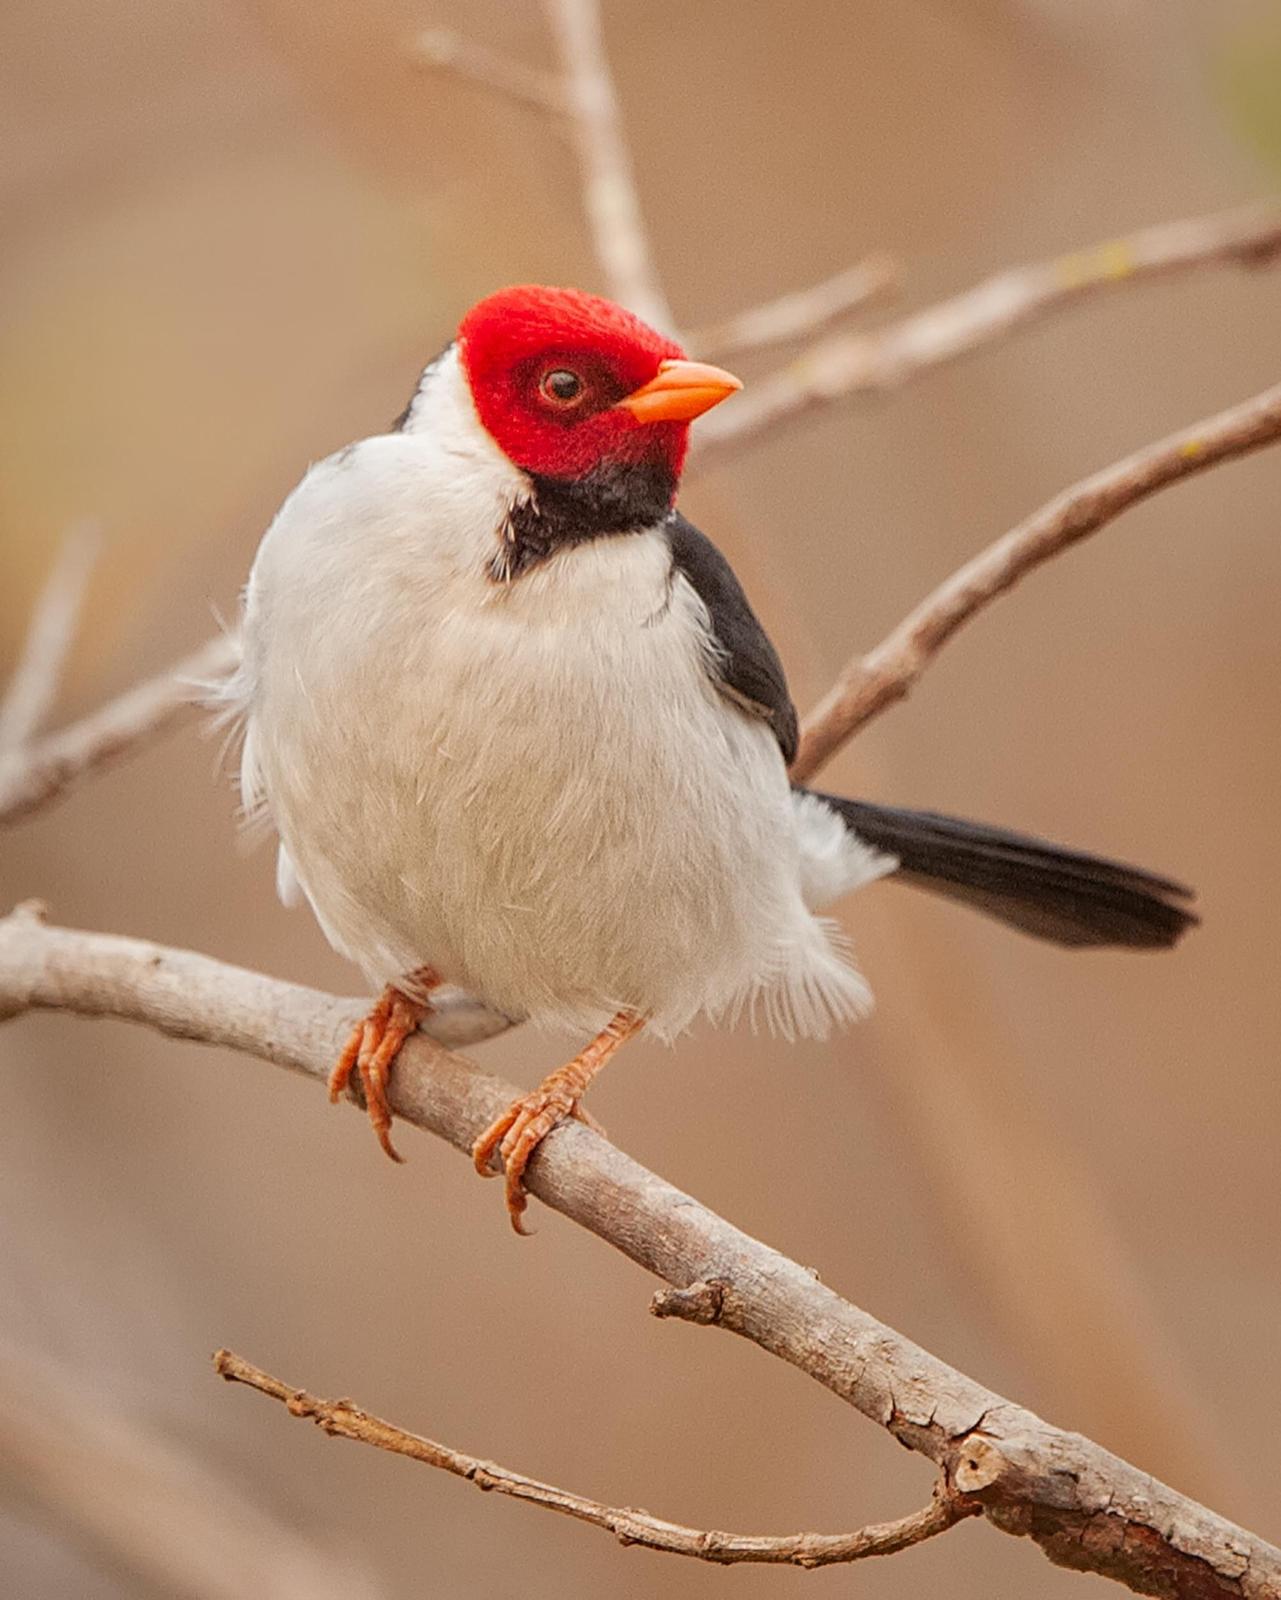 Red-capped Cardinal Photo by Christine Hansen